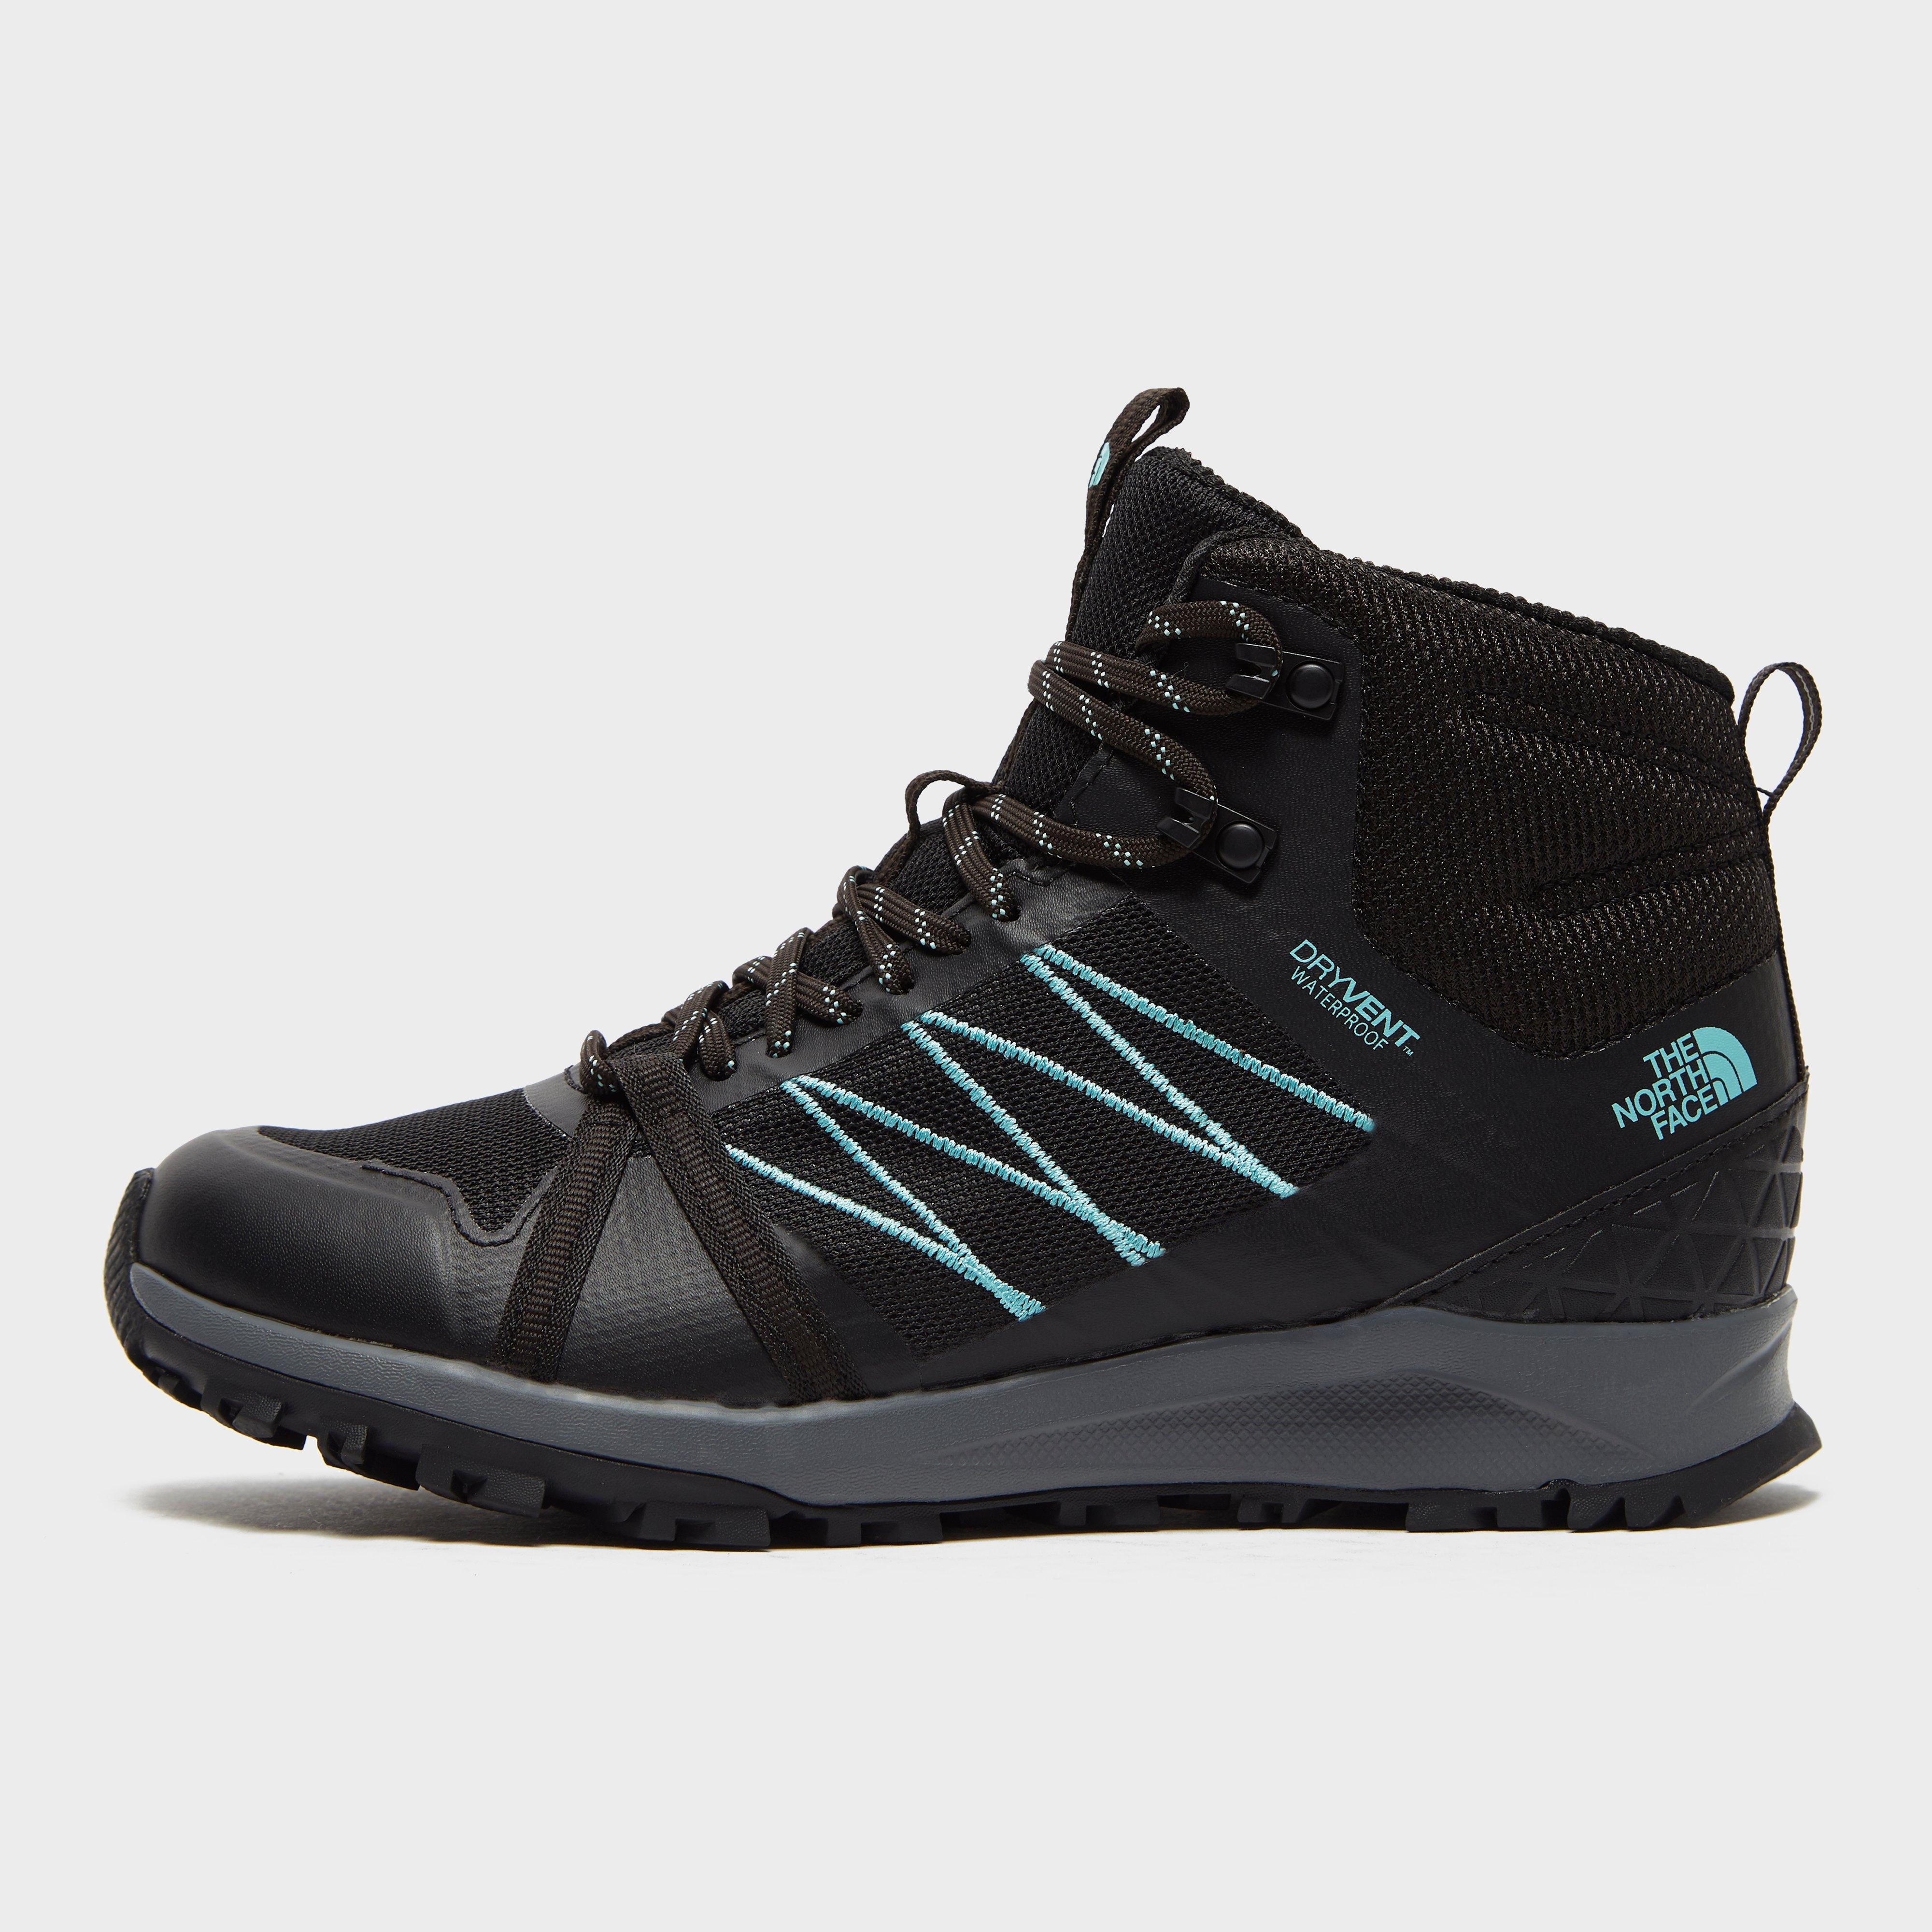 north face walking boots